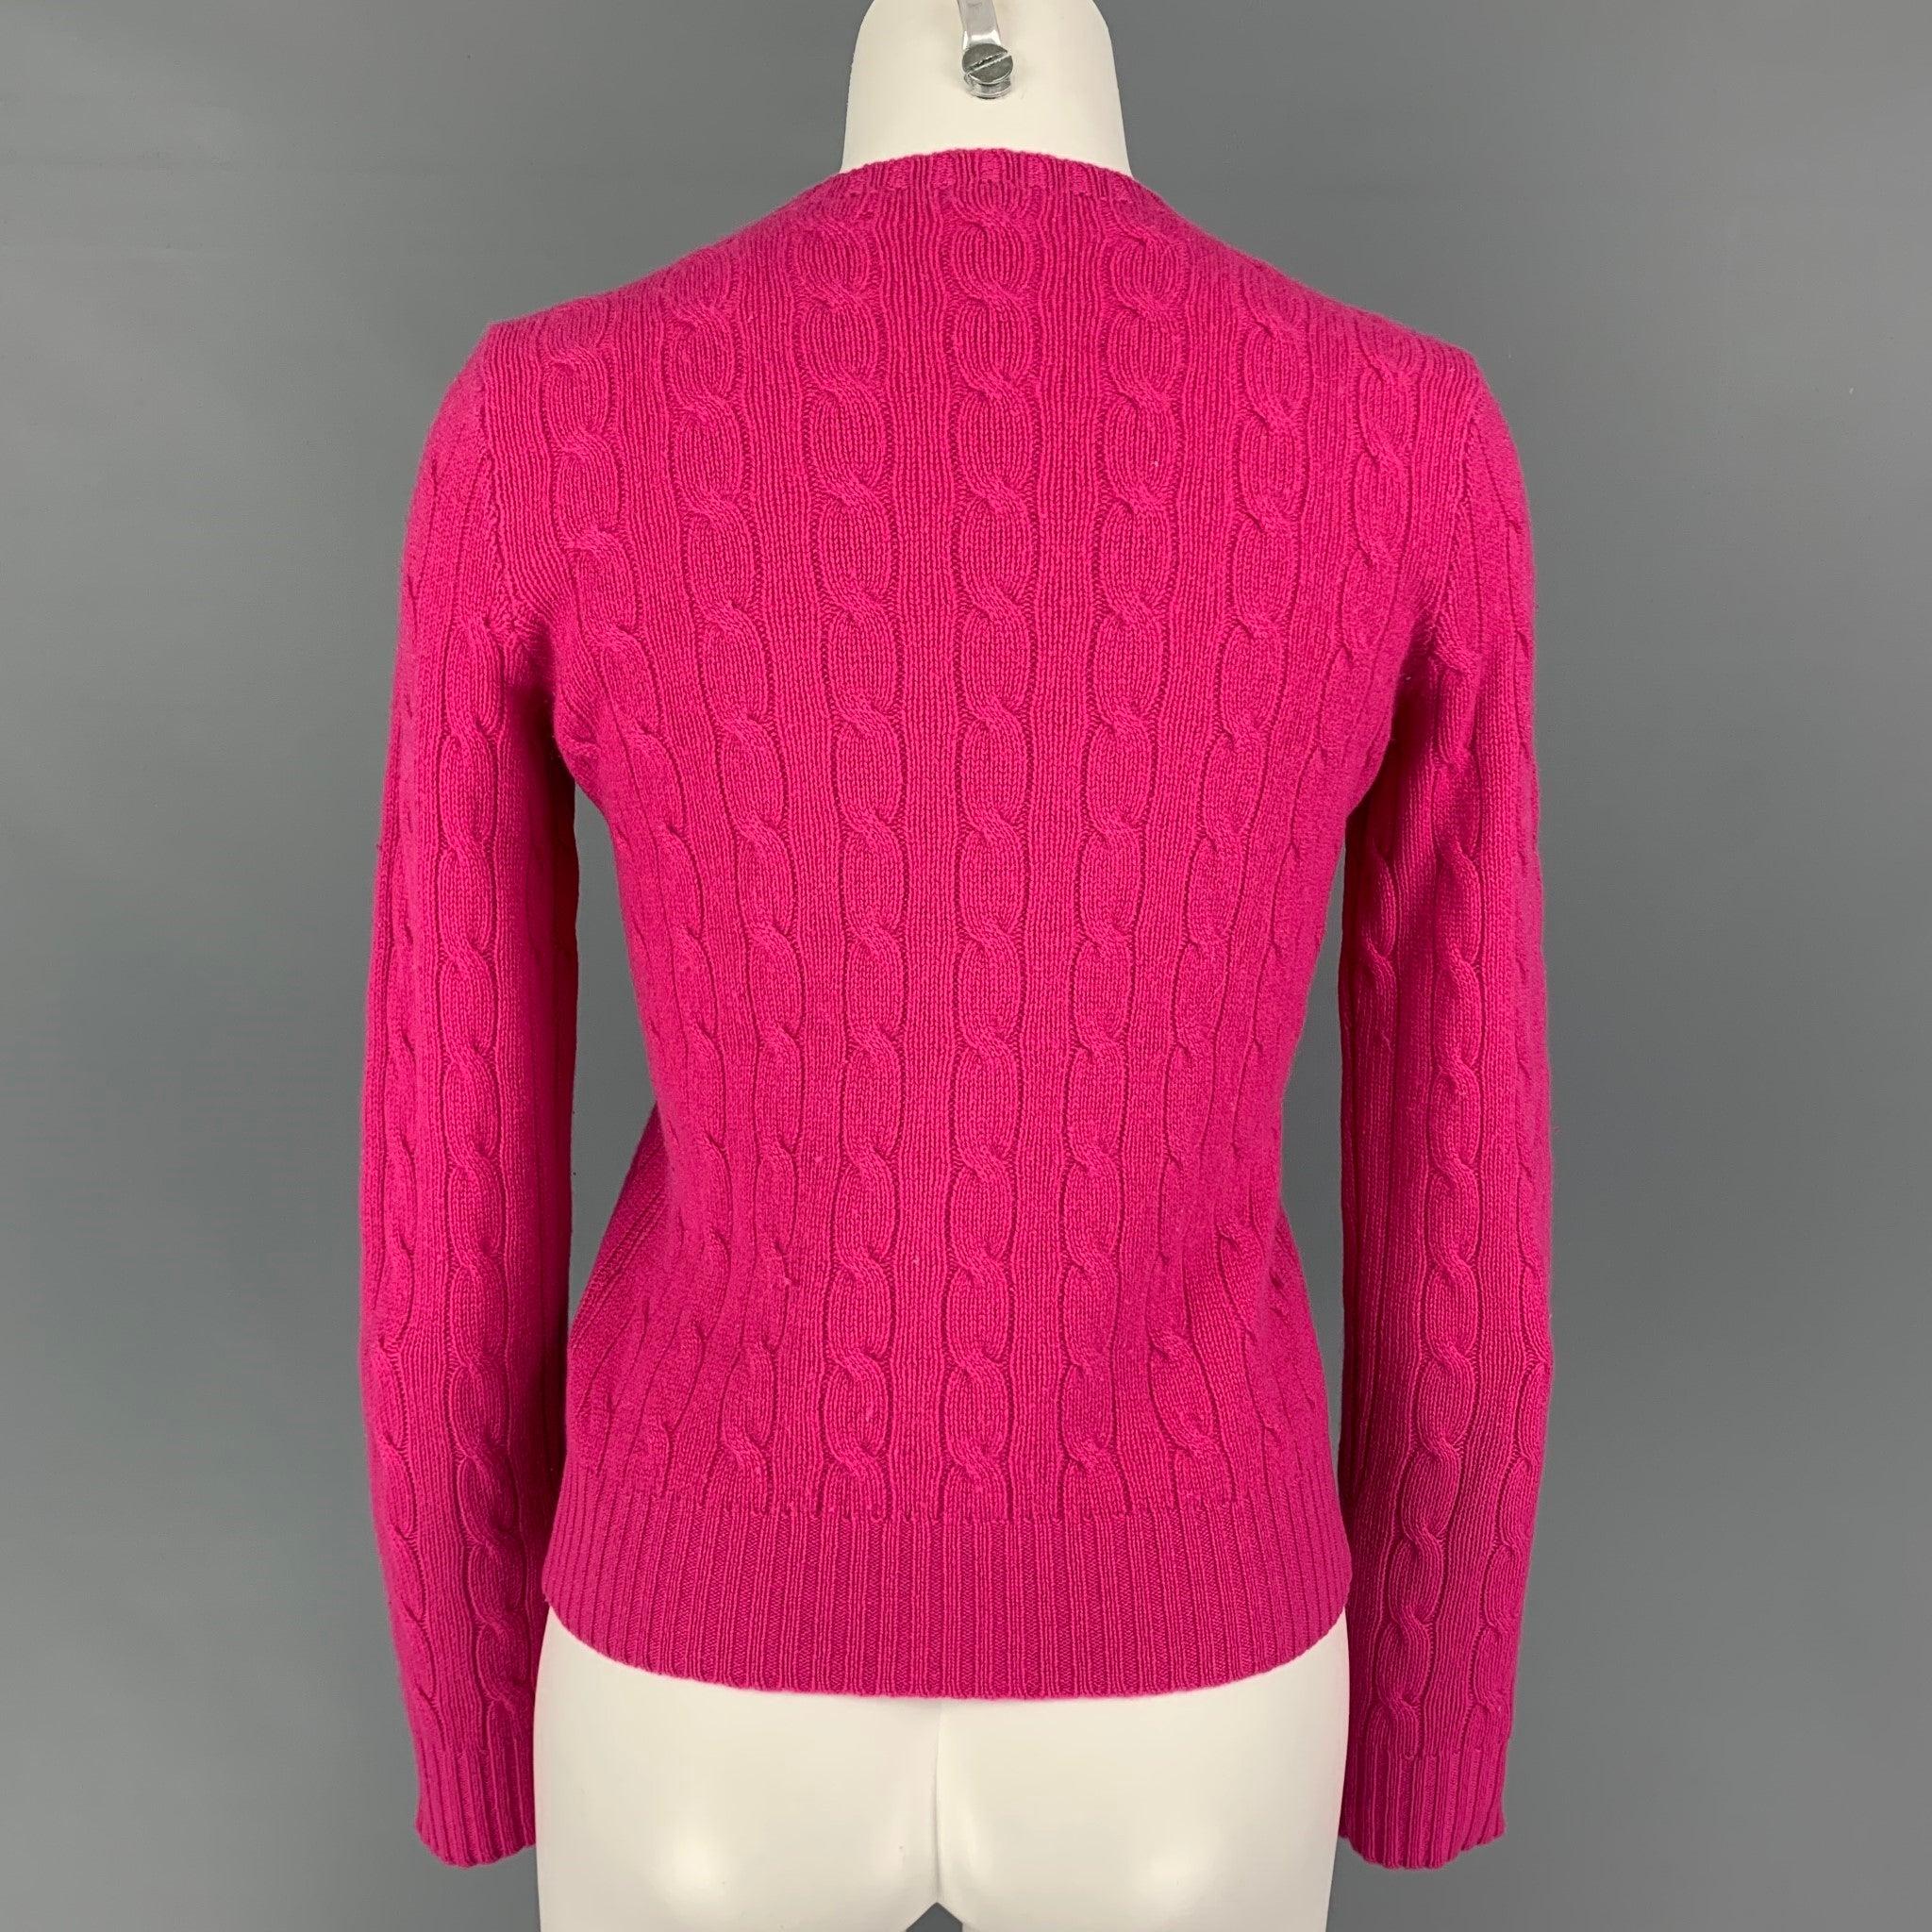 RALPH LAUREN Black Label Size M Raspberry Cashmere Cable Knit Crew-Neck Sweater In Good Condition For Sale In San Francisco, CA